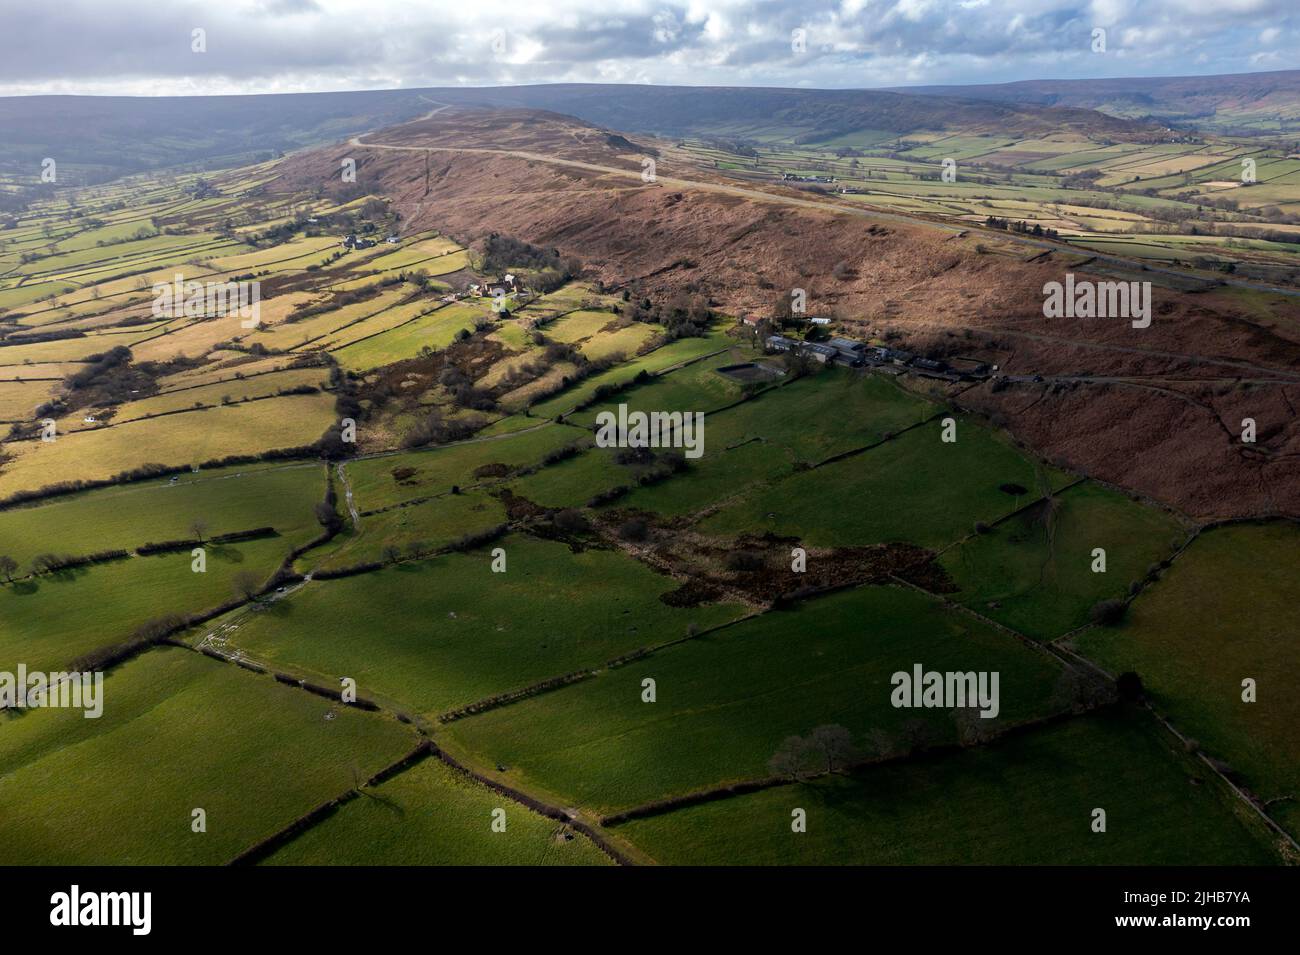 Castleton Rigg from the Air, Noth York Moors Nationa lPark Foto Stock